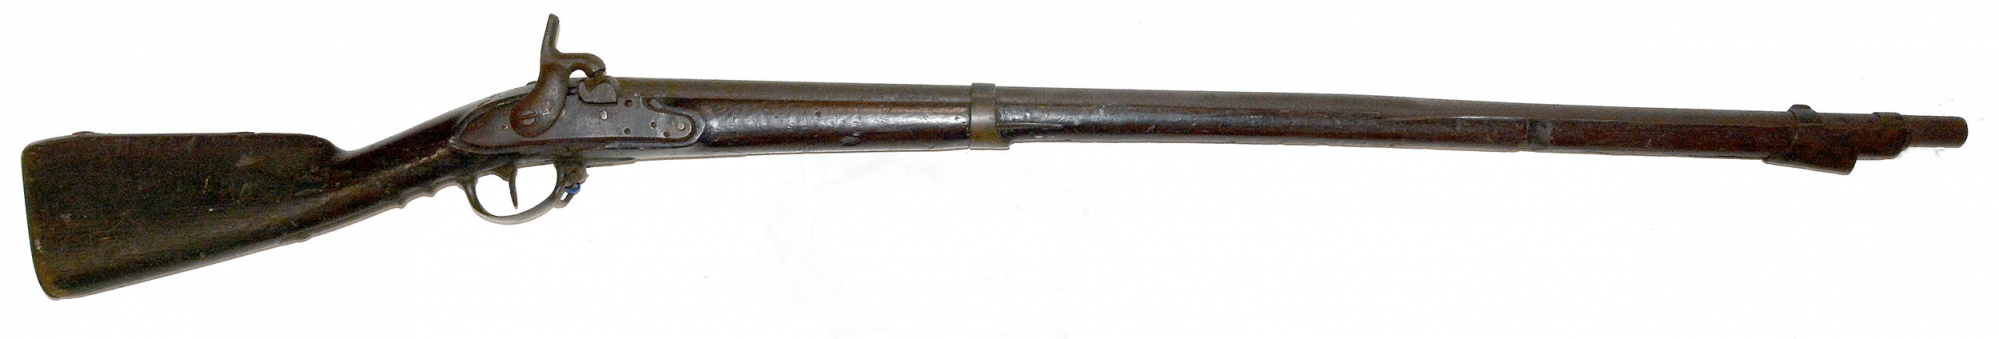 CONFEDERATE ADAMS ALTERED CITY OF RICHMOND MARKED VIRGINIA MILITIA MUSKET: POSSIBLY ALSO 2nd NC BATTALION, WISE LEGION